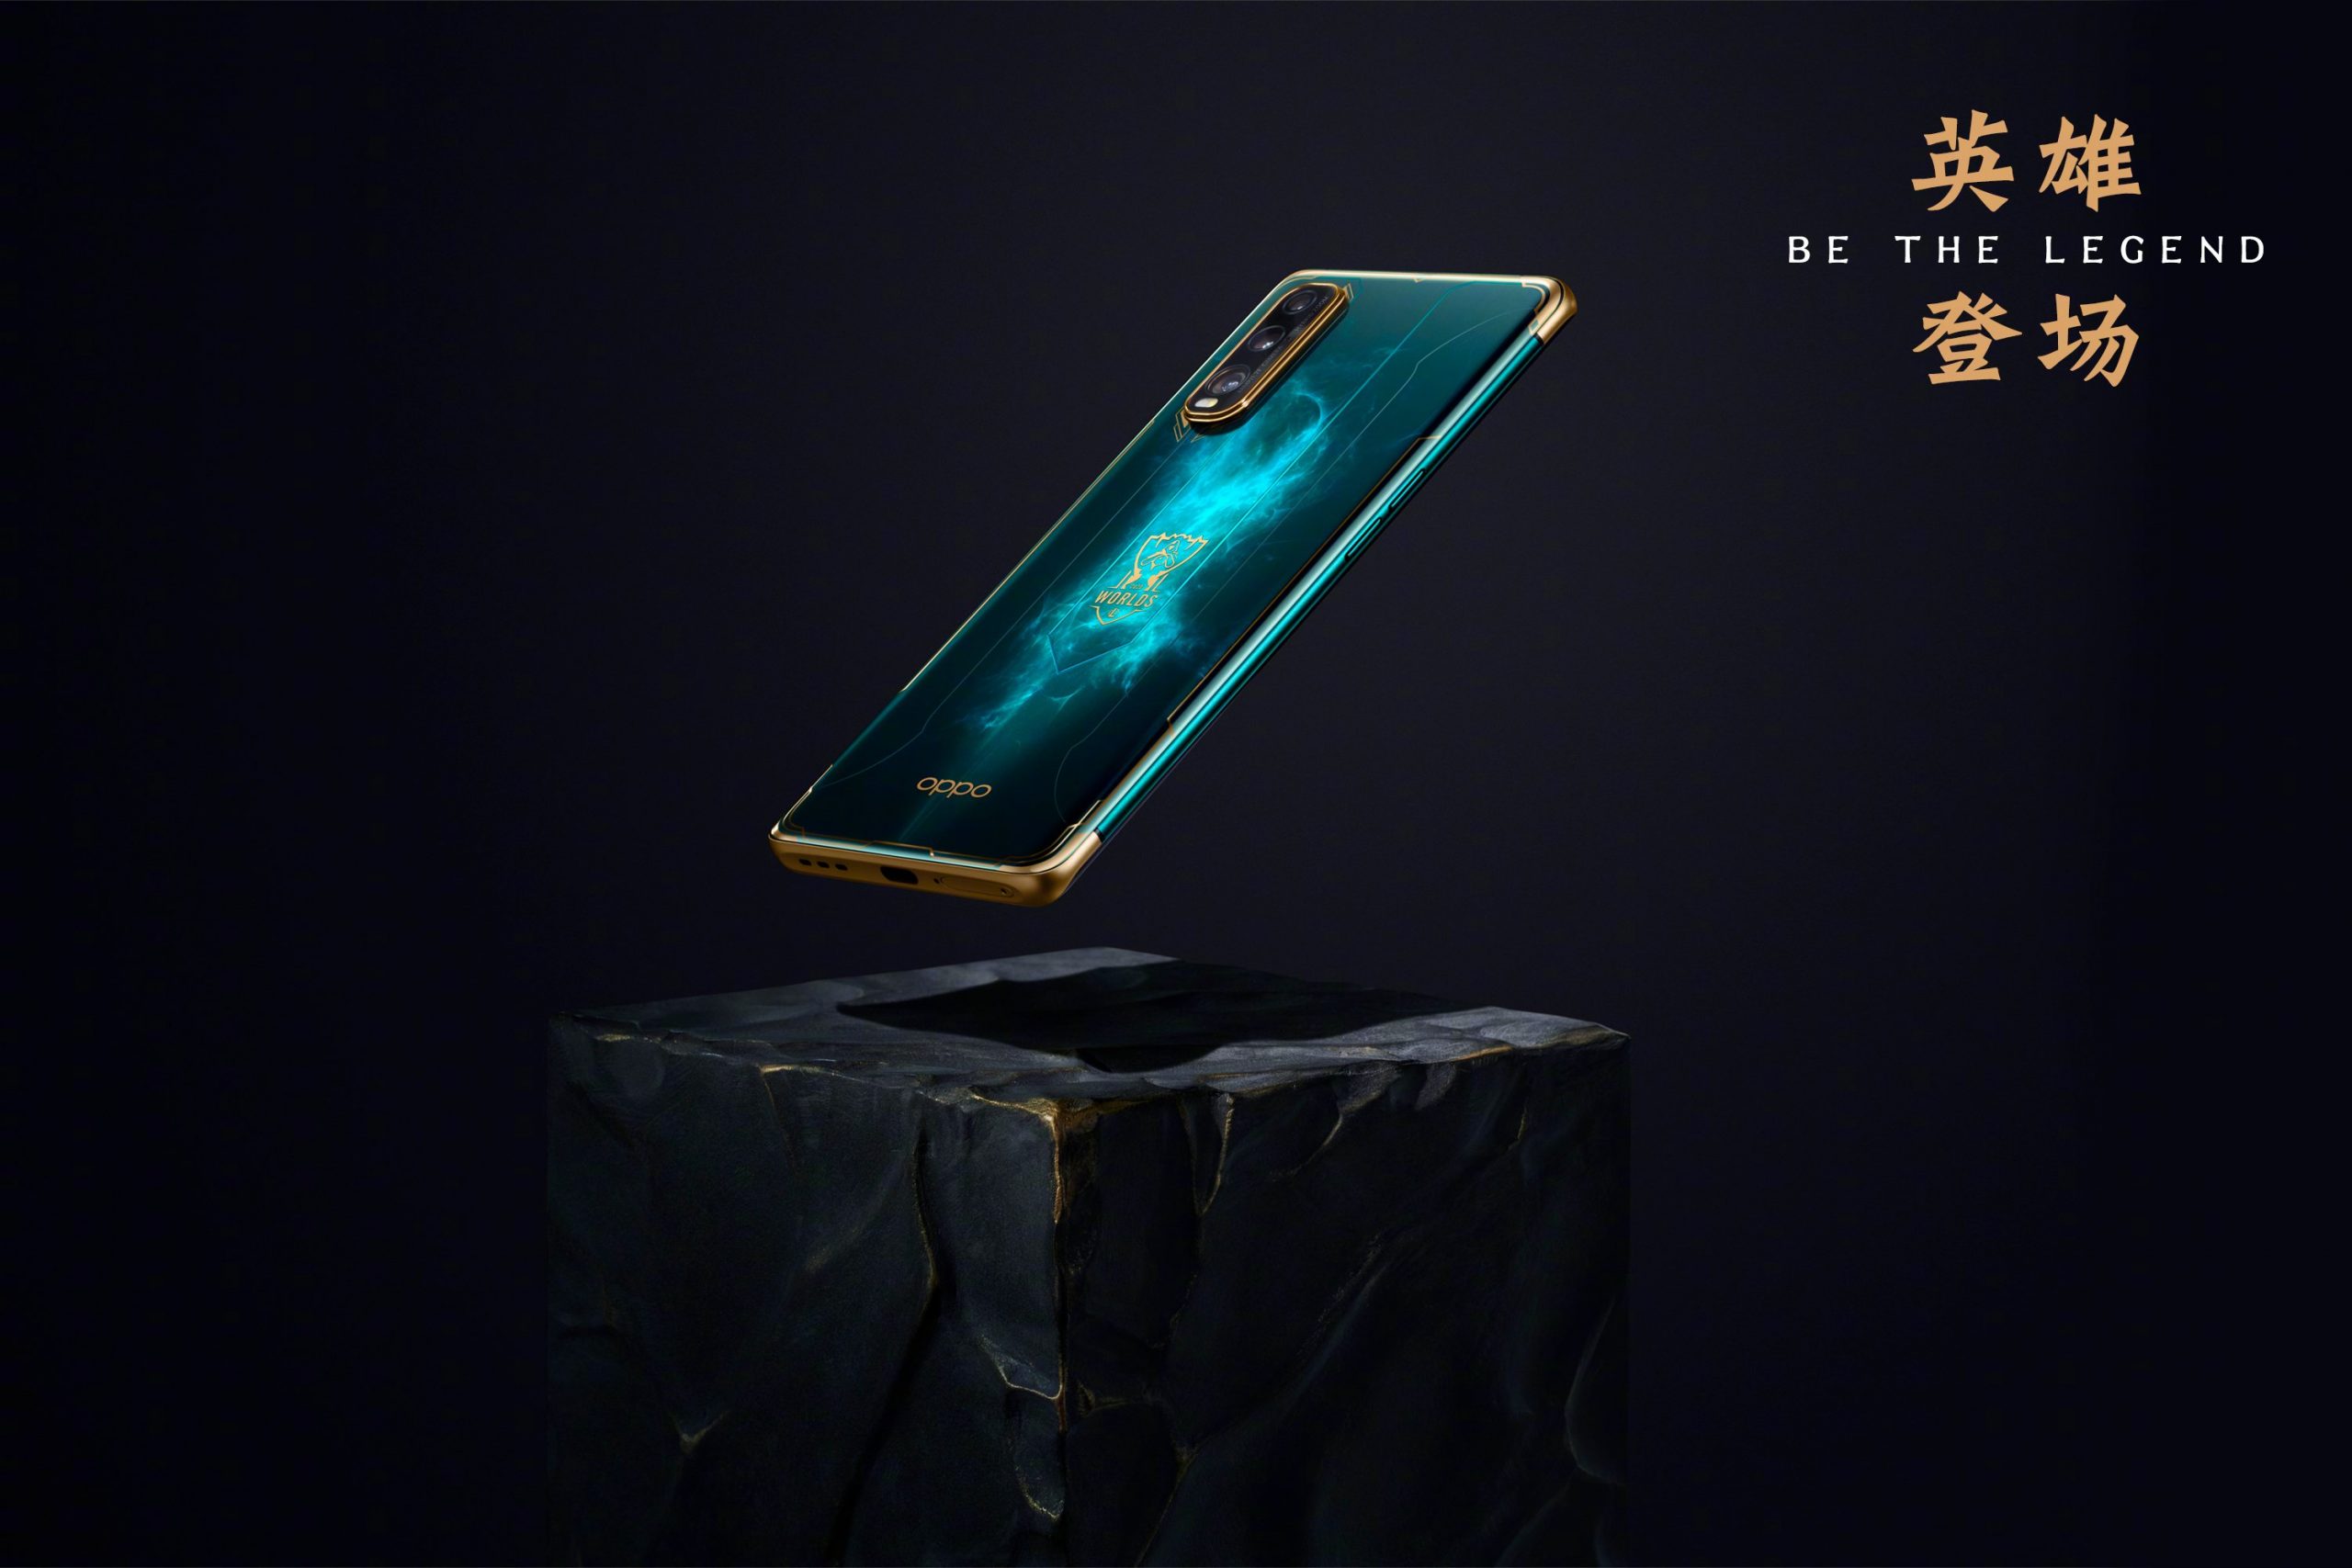 Oppo Find X2 League of Legends Limited Edition is now open for reservations in China